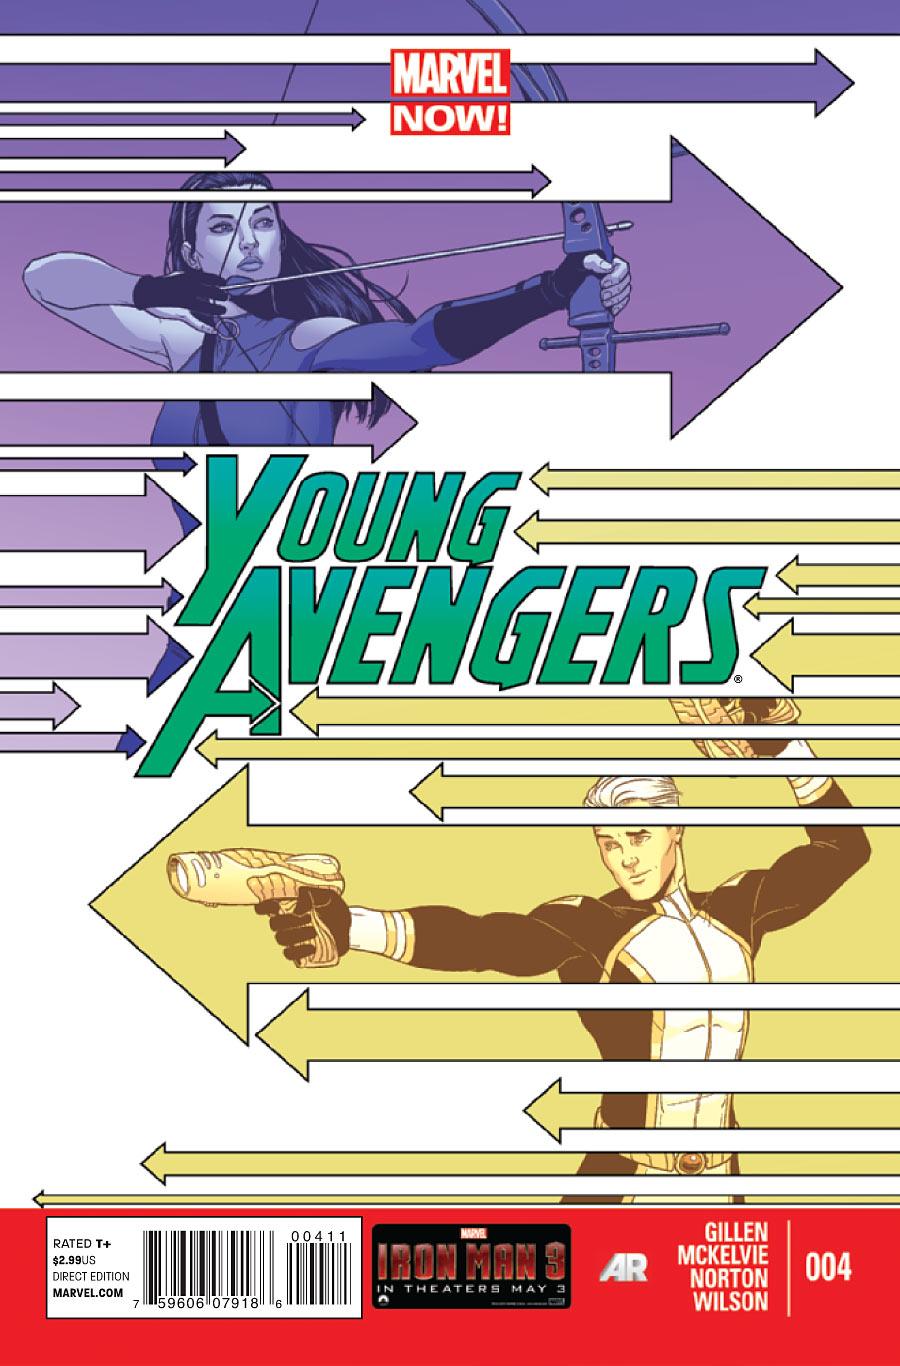 Young Avengers Vol. 2 #4